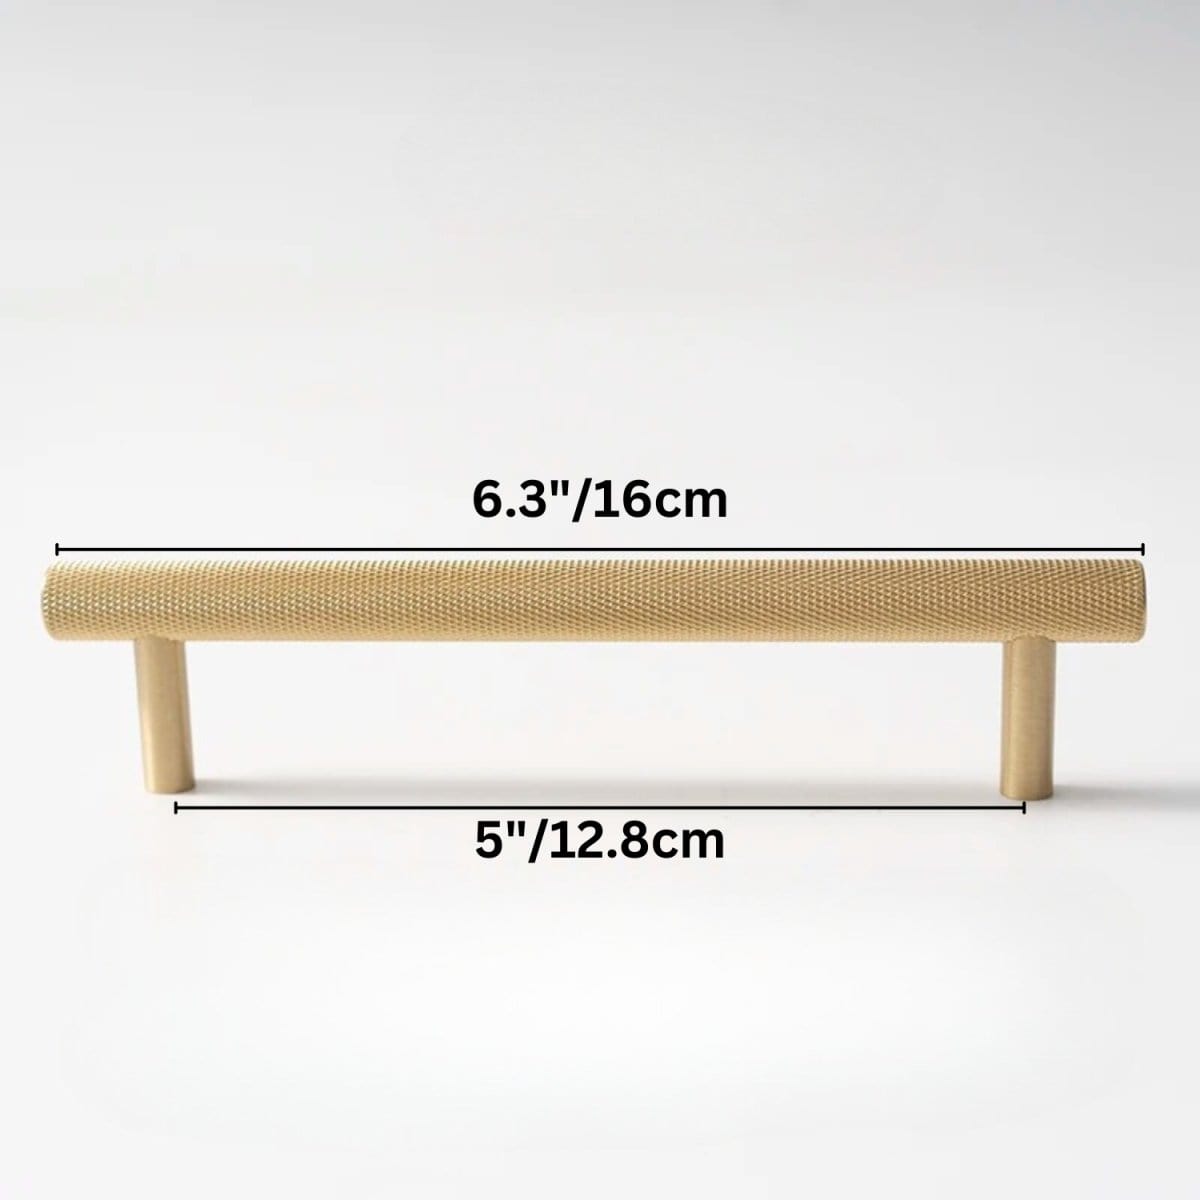 Residence Supply Hole to Hole: 5" / 12.8cm / Satin Brass Cucao Knob & Pull Bar